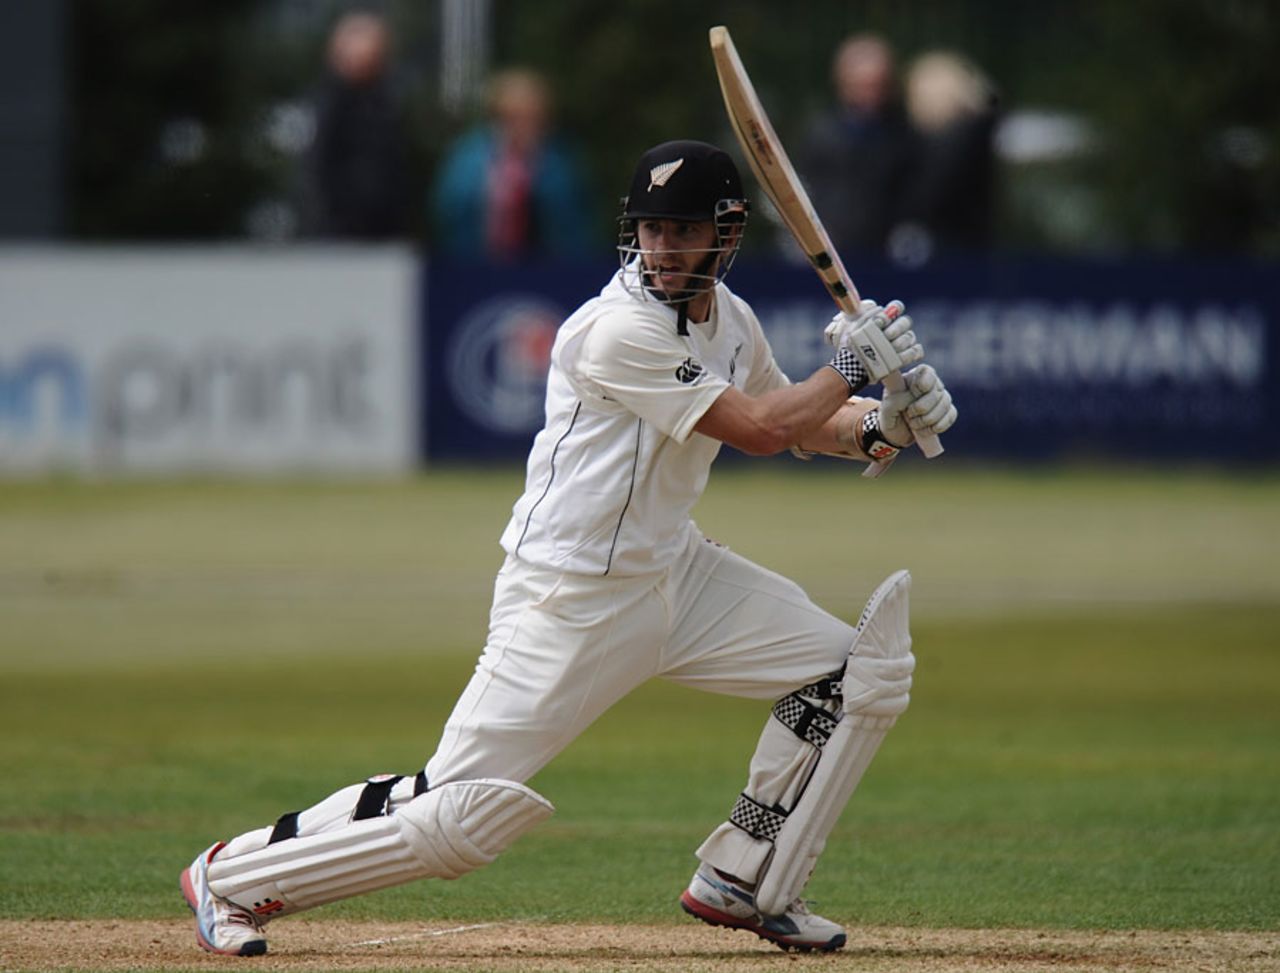 Kane Williamson reached 43 before he was caught behind, Derbyshire v New Zealanders, Tour Match, 1st day, Derby, May 4, 2013